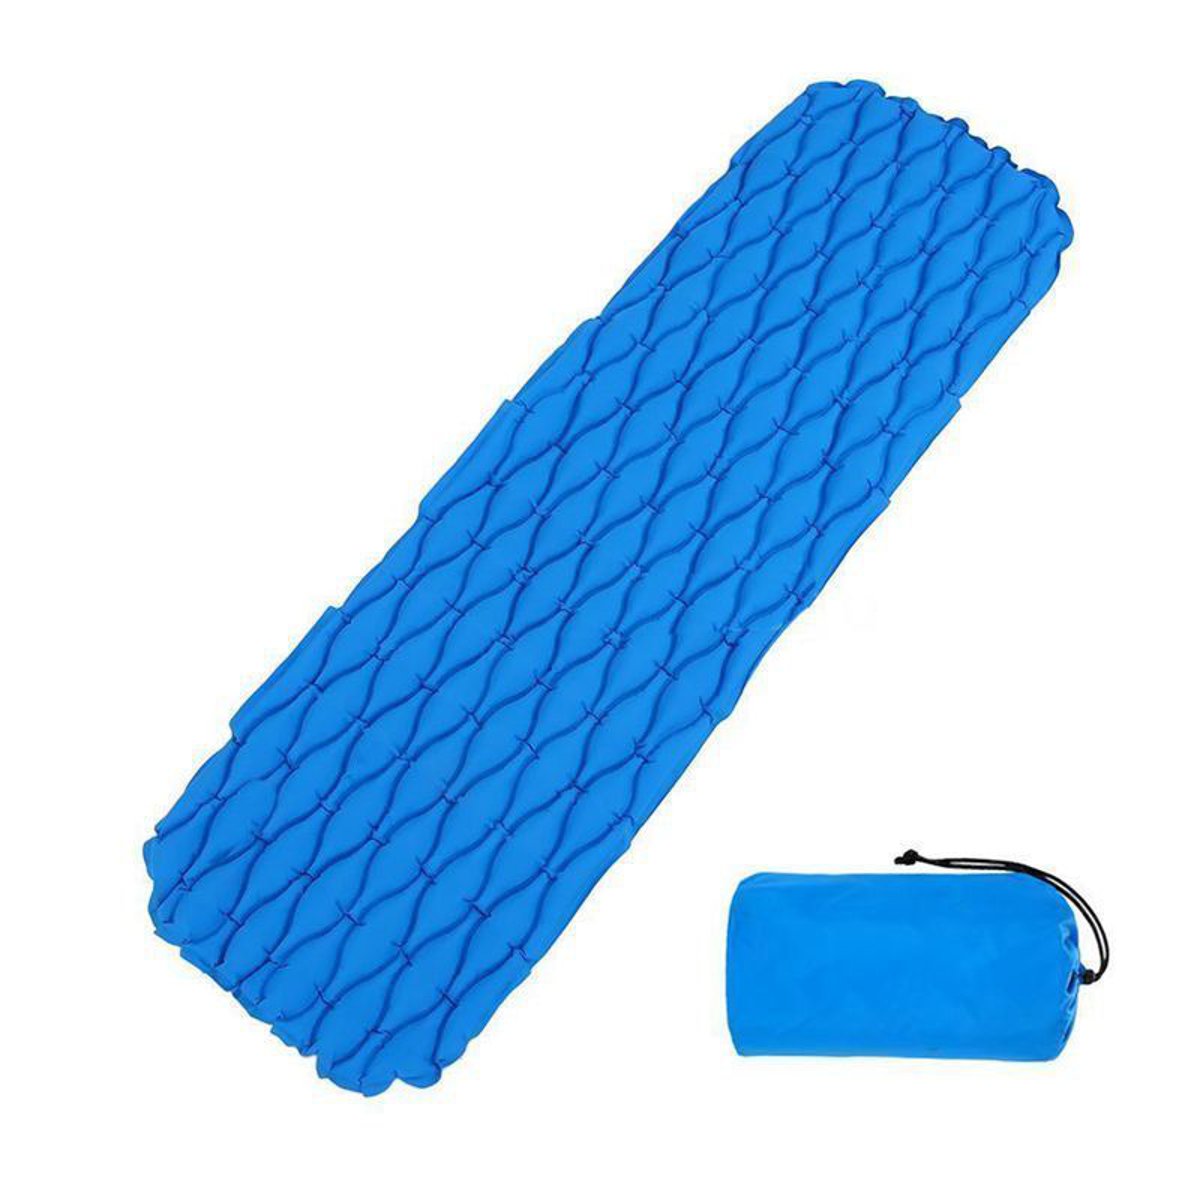 Outdoor-Camping-Portable-Inflatable-Air-Mattresses-Single-Sleeping-Moisture-proof-Mat-Pad-1298052-7